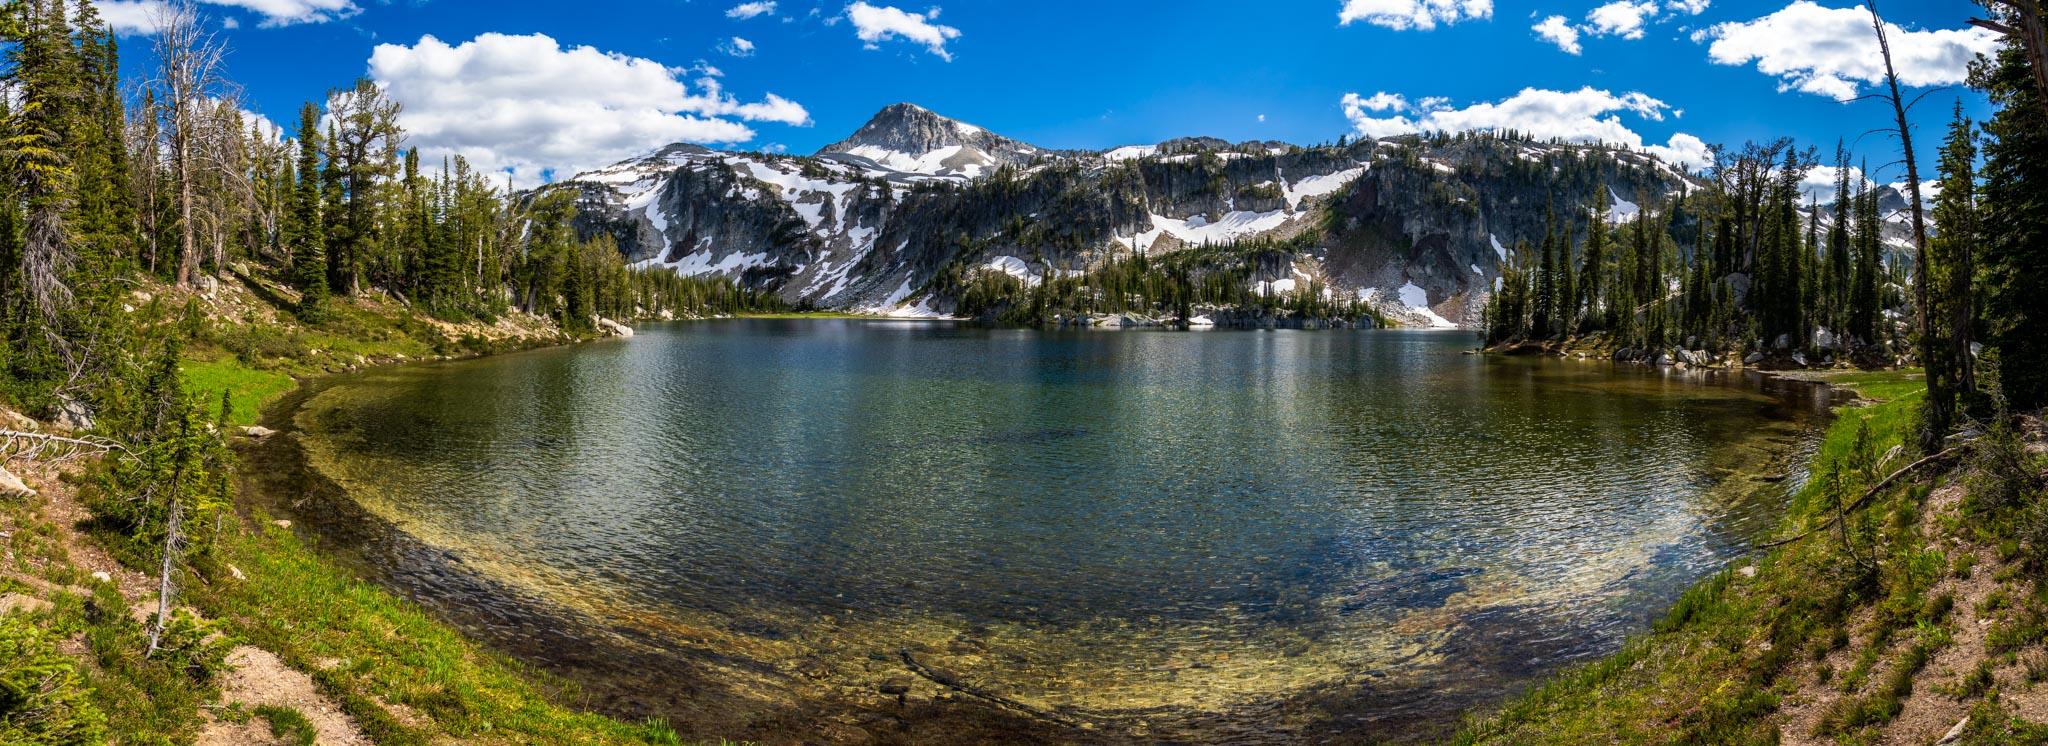 Mirror Lake in the Eagle Cap Wilderness